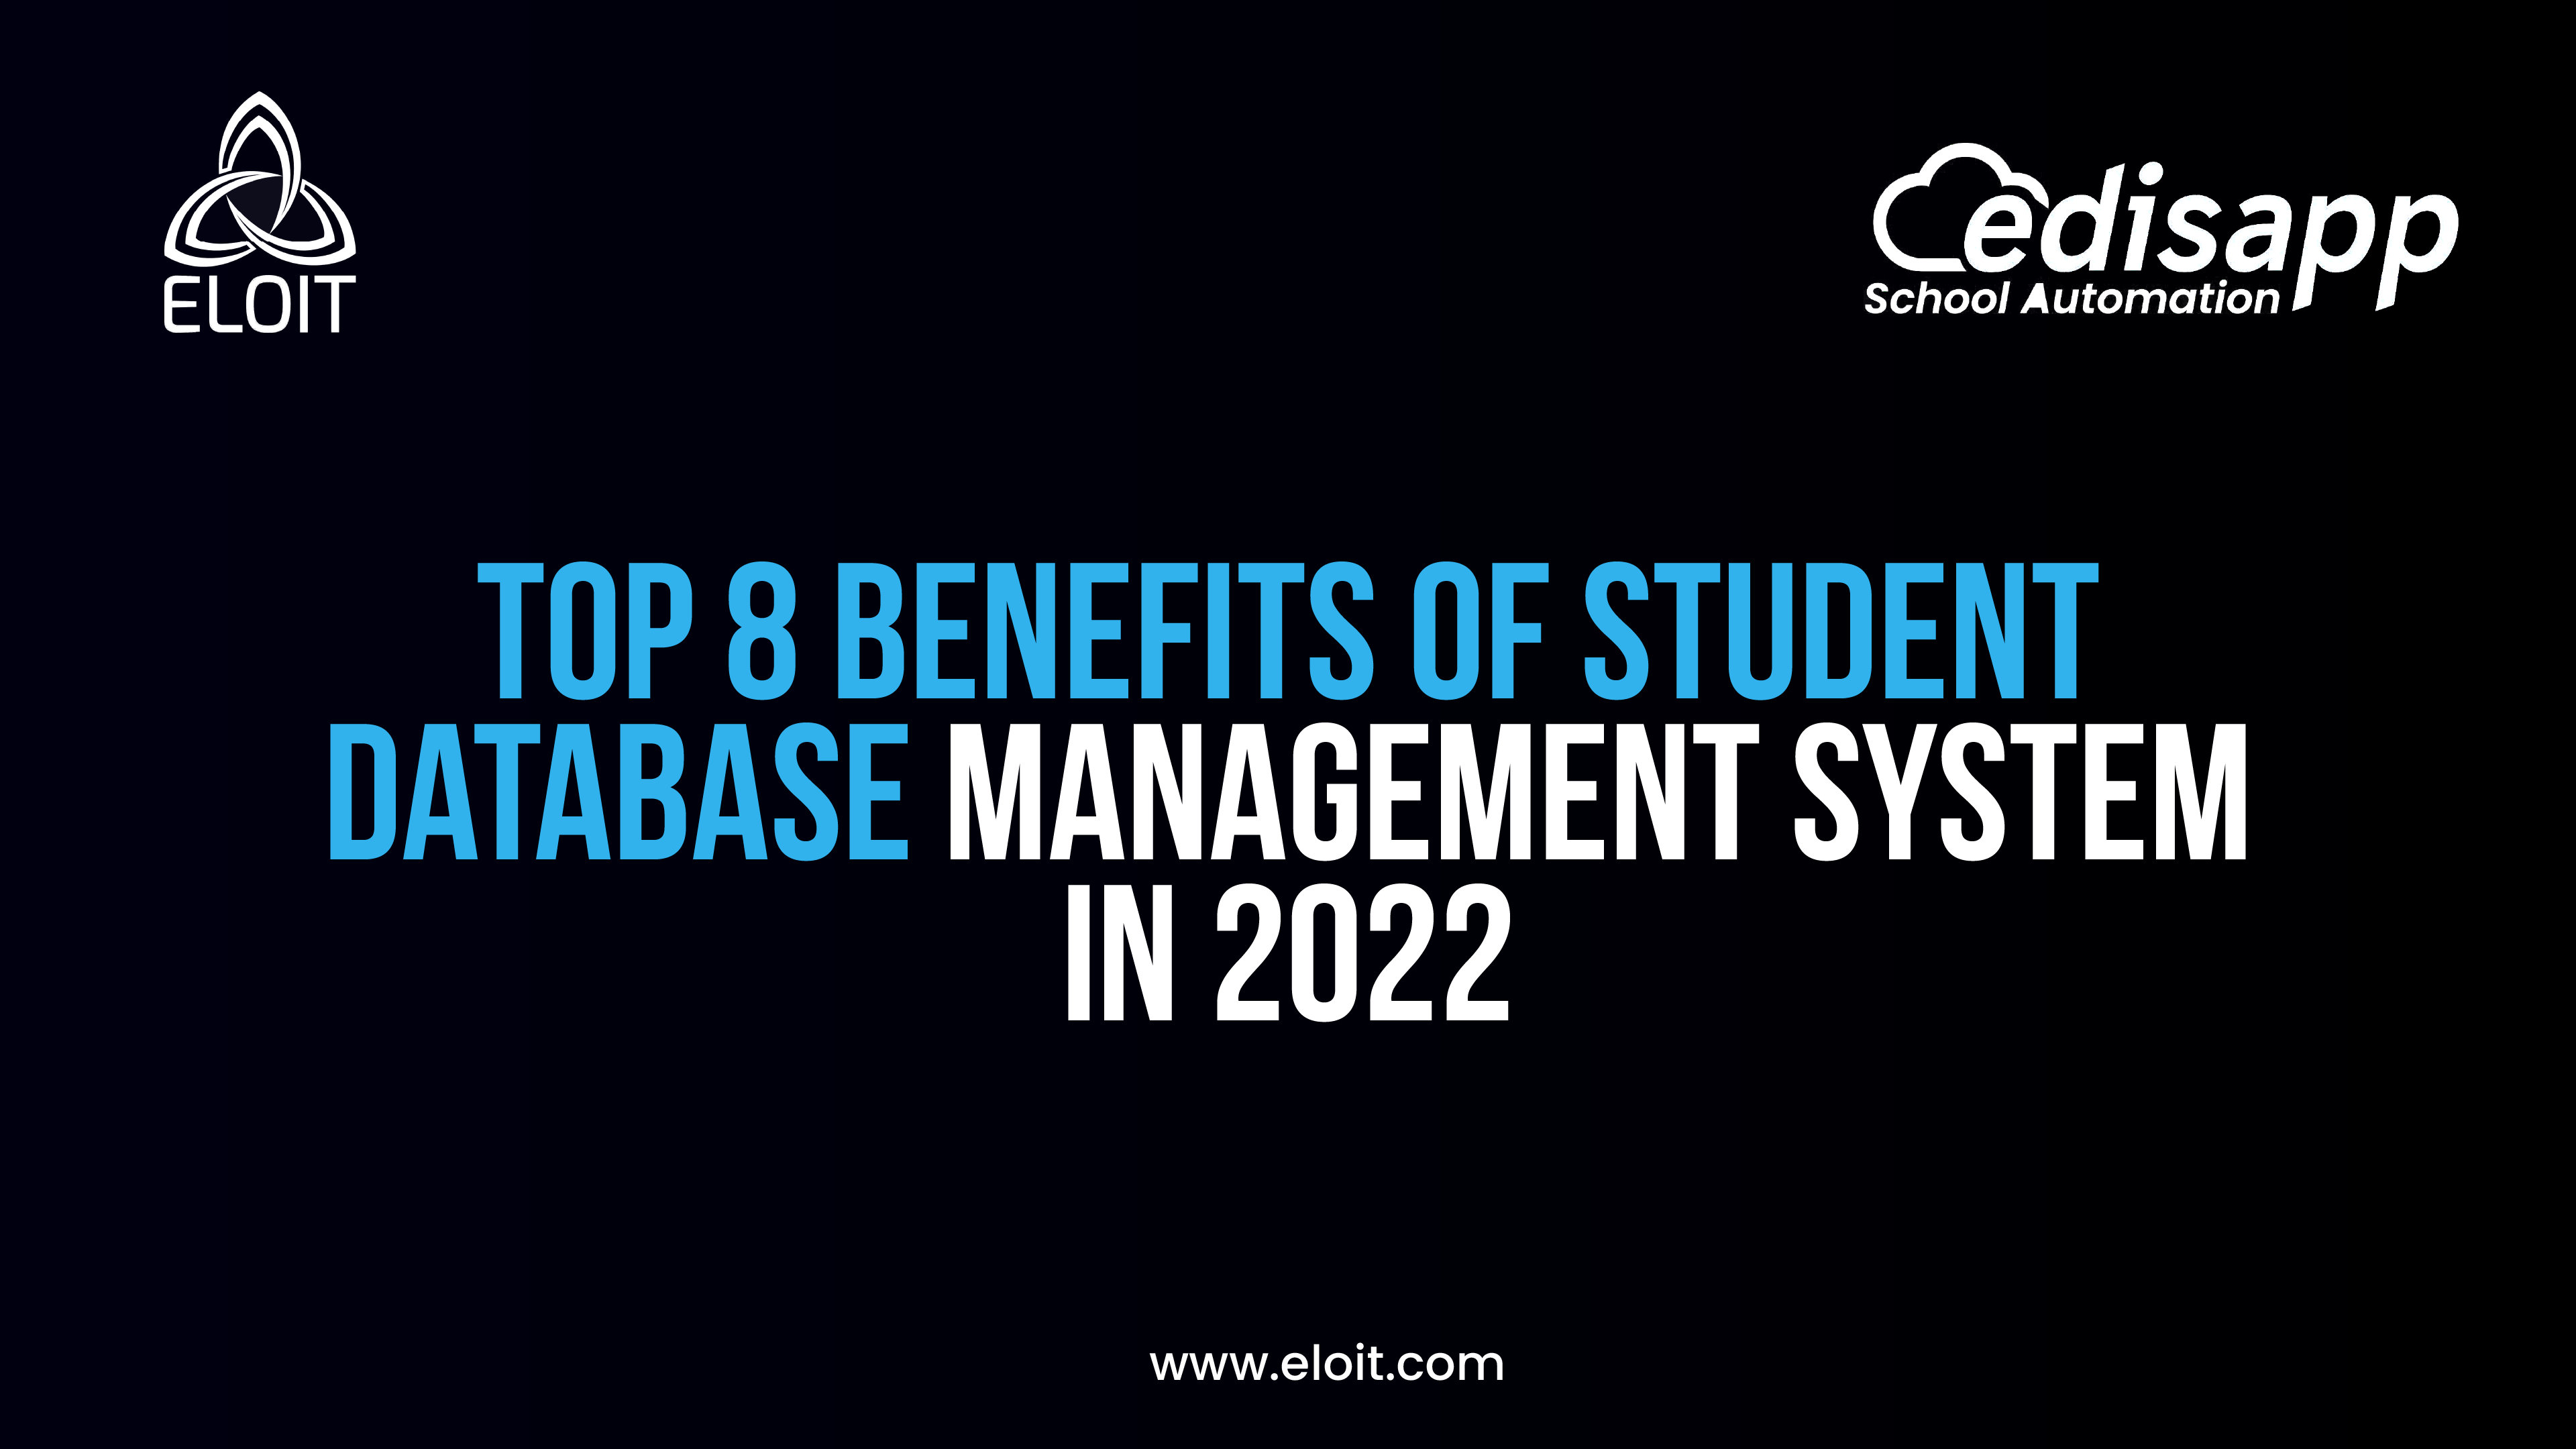 Top 8 Benefits of Student Database Management System in 2022